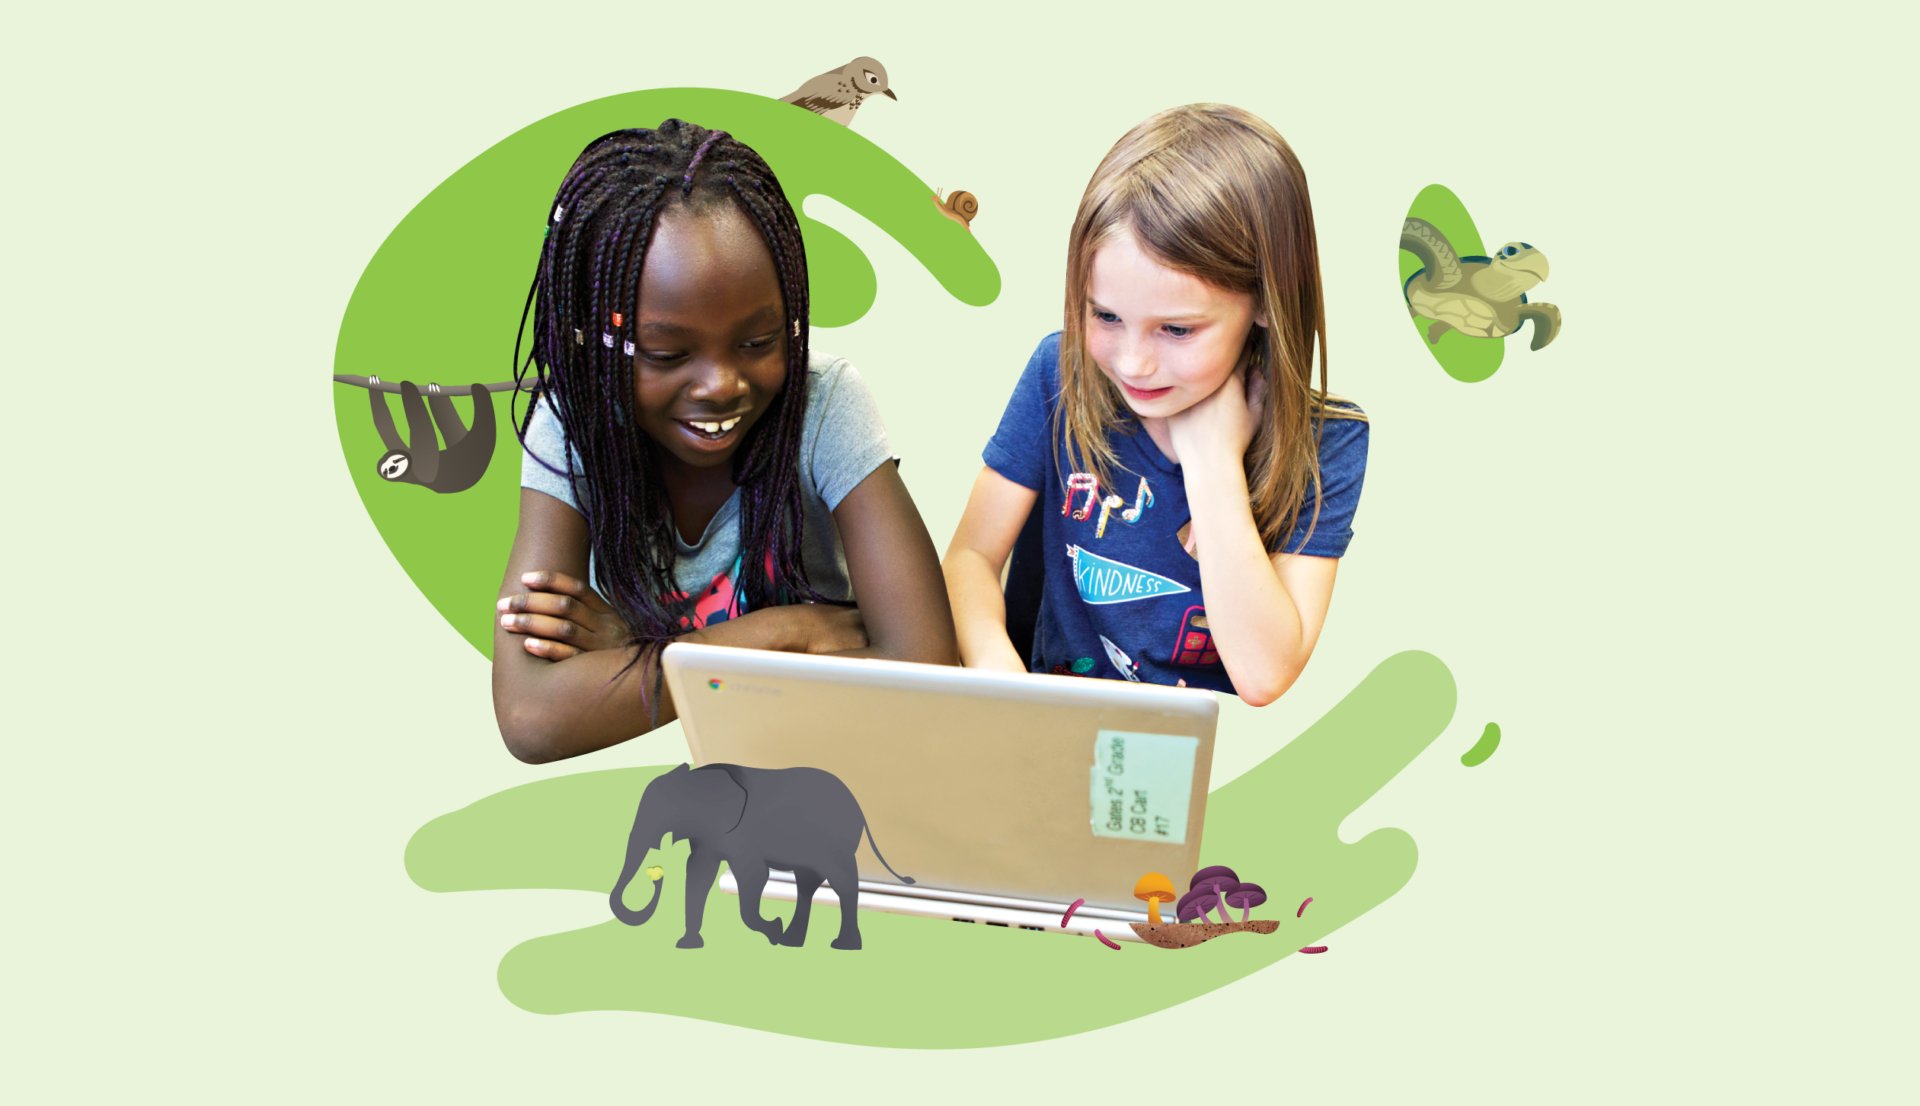 Two girls coding together on a laptop, surrounded by illustrated animals on a green abstract background.